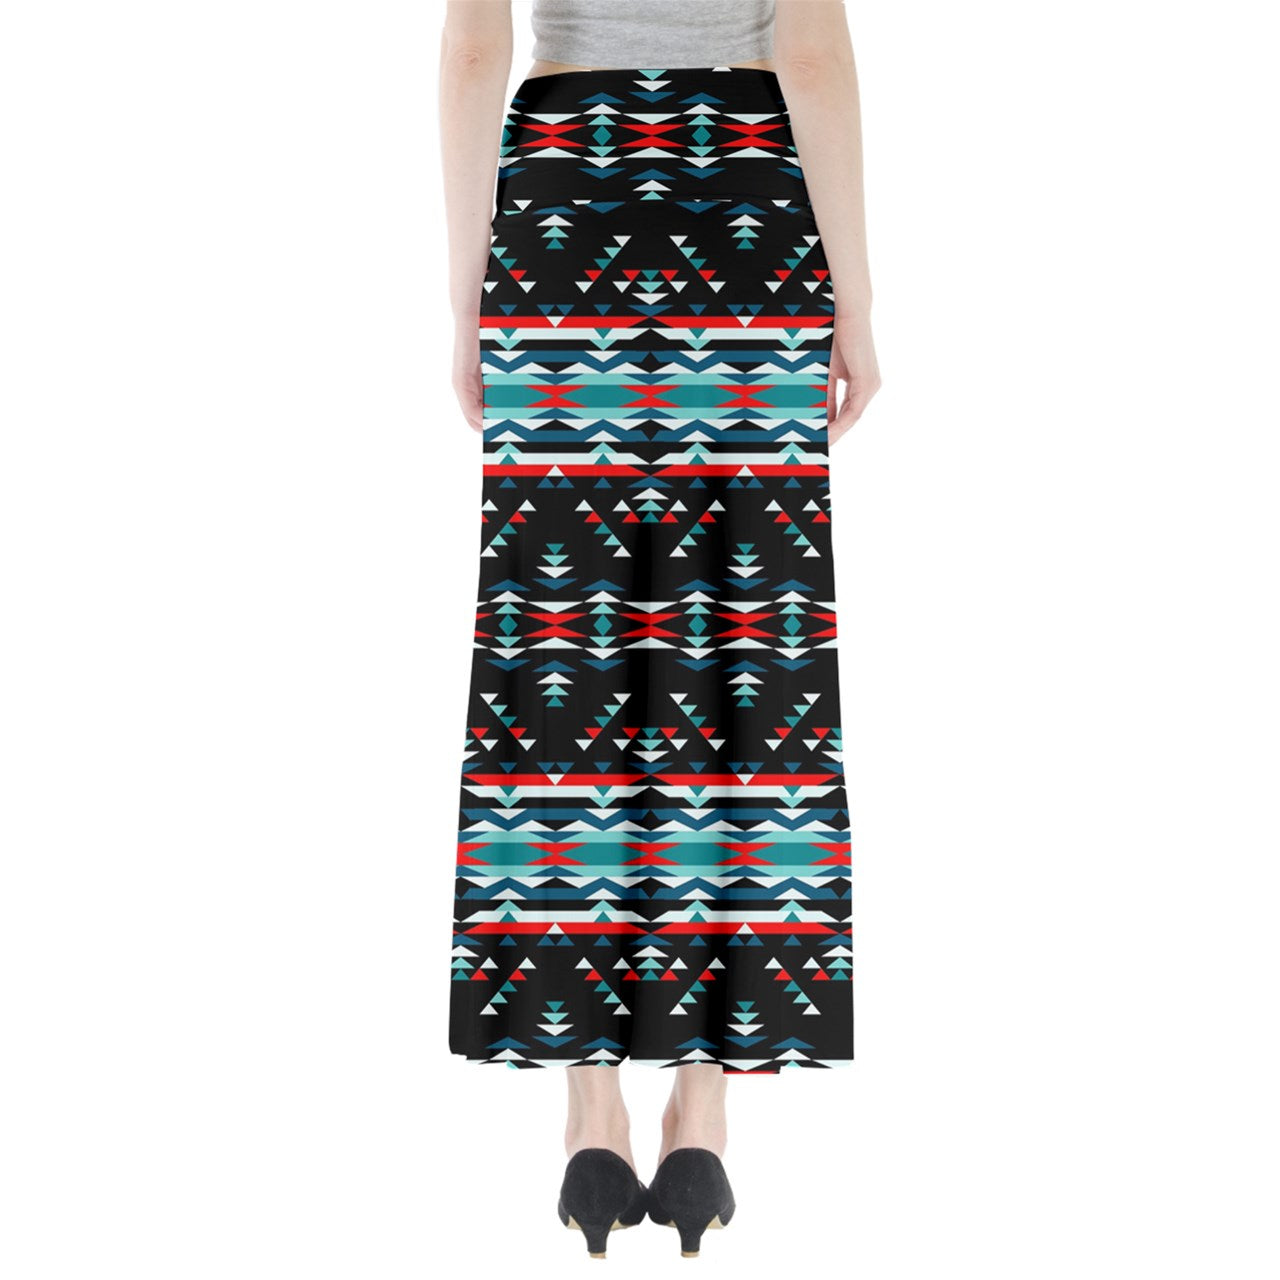 Visions of Peaceful Nights Full Length Maxi Skirt